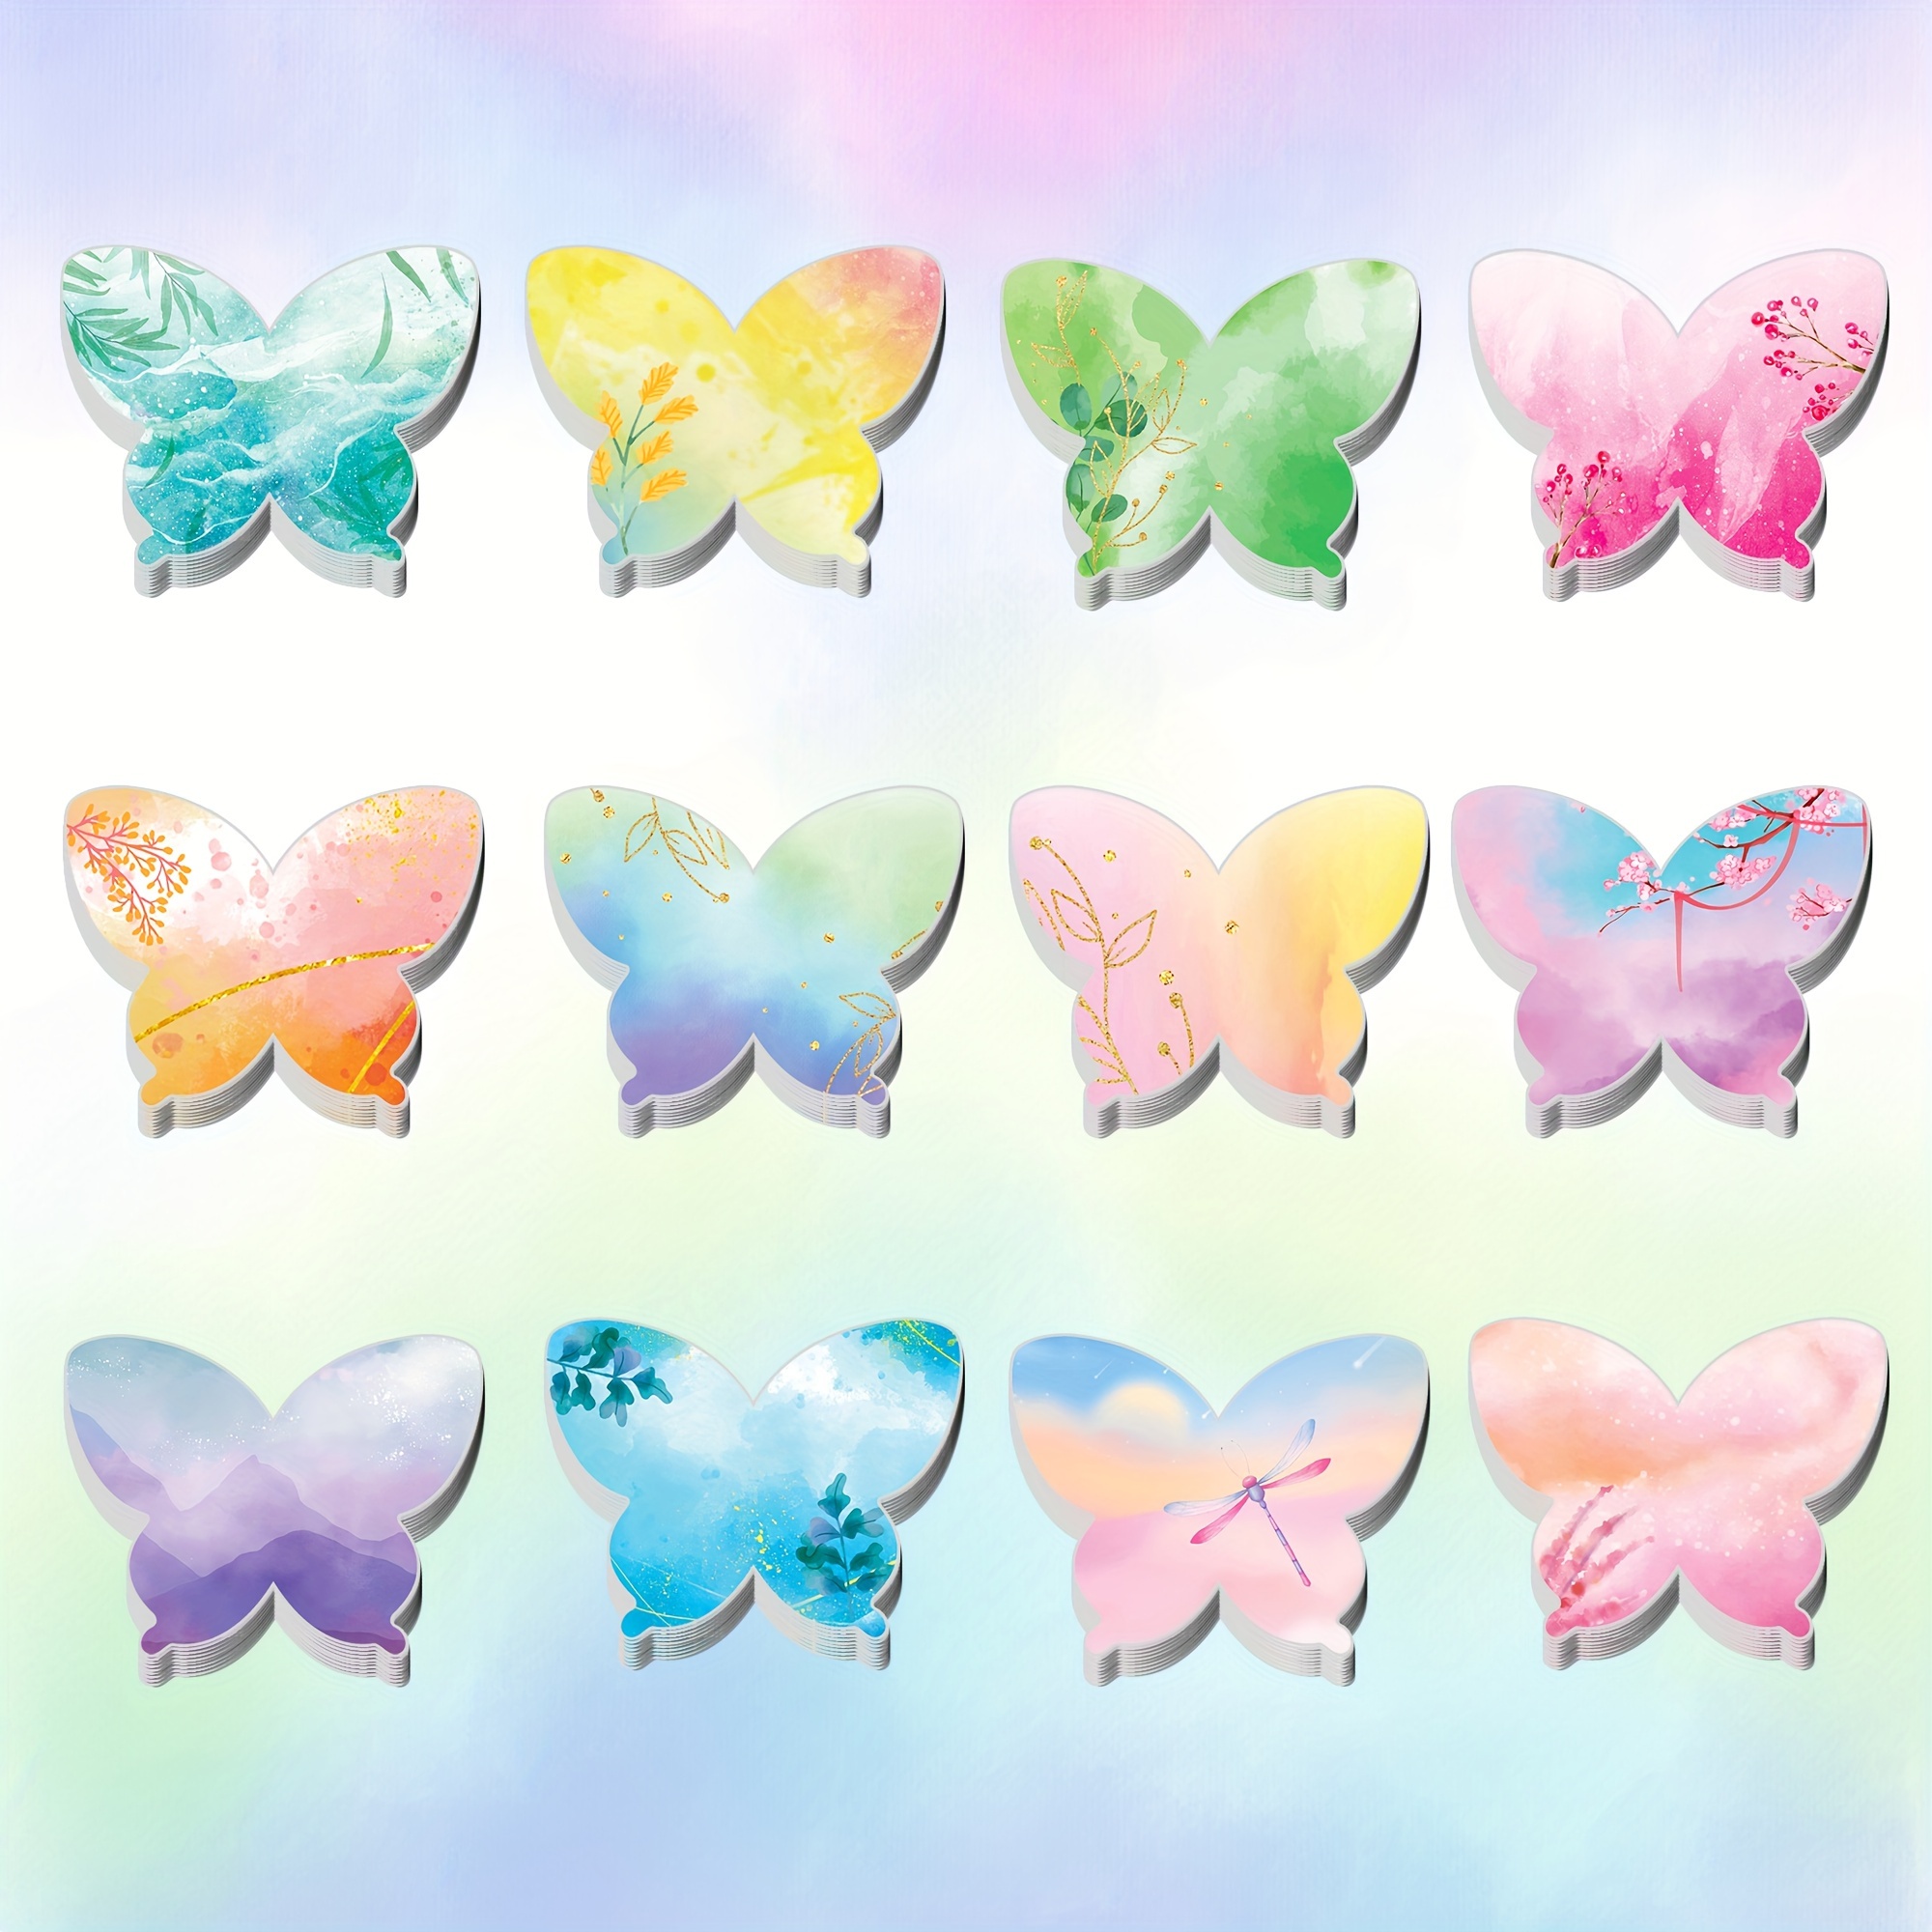 

240pcs Butterfly Sticky Notes Notepad Self-adhesive Writing Memo Pads For Office School Stationery Party Supplies